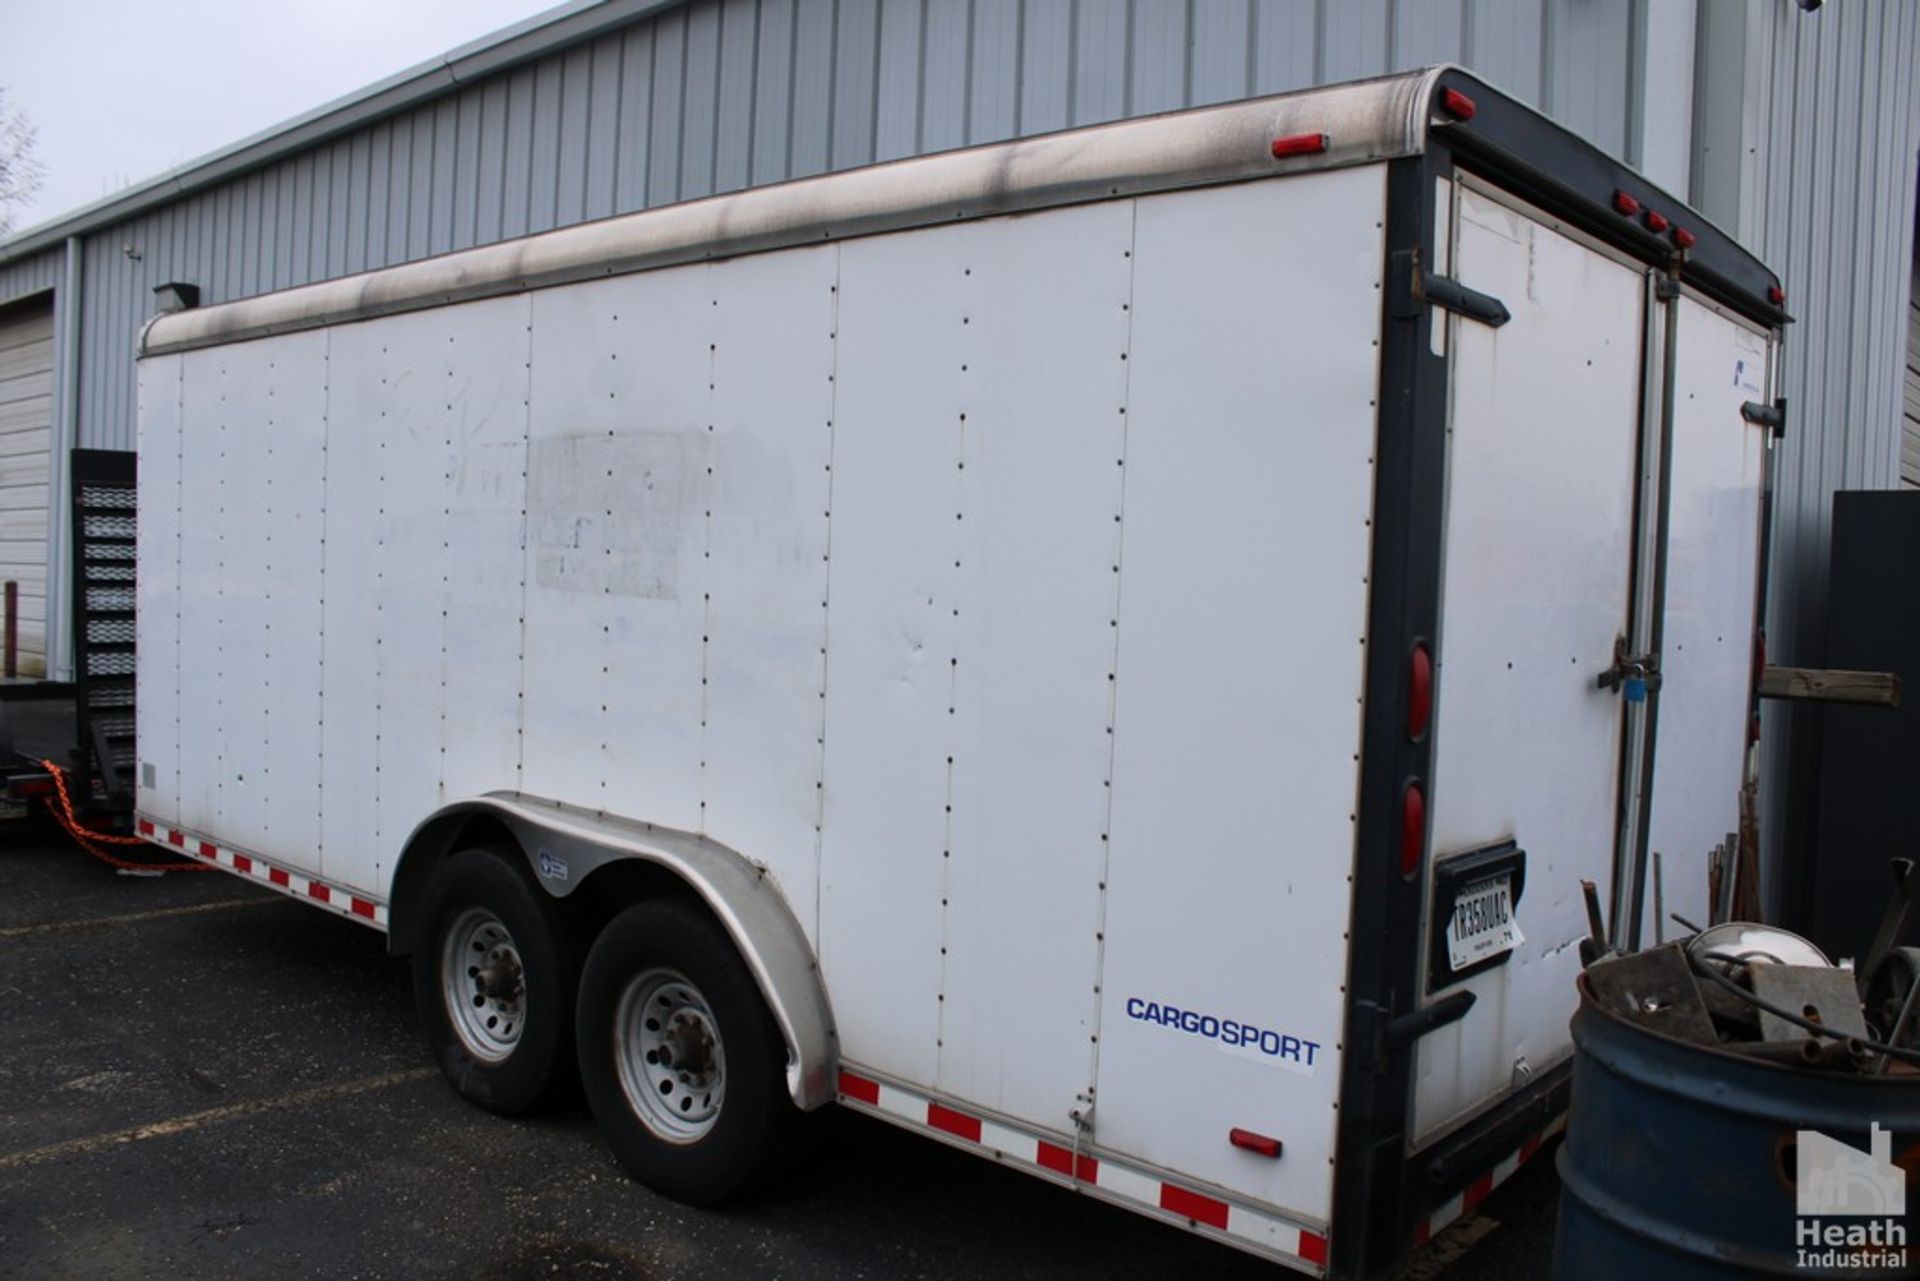 PACE "CARGO SPORT" 18' TANDEM AXLE ENCLOSED CARGO TRAILER - Image 2 of 3